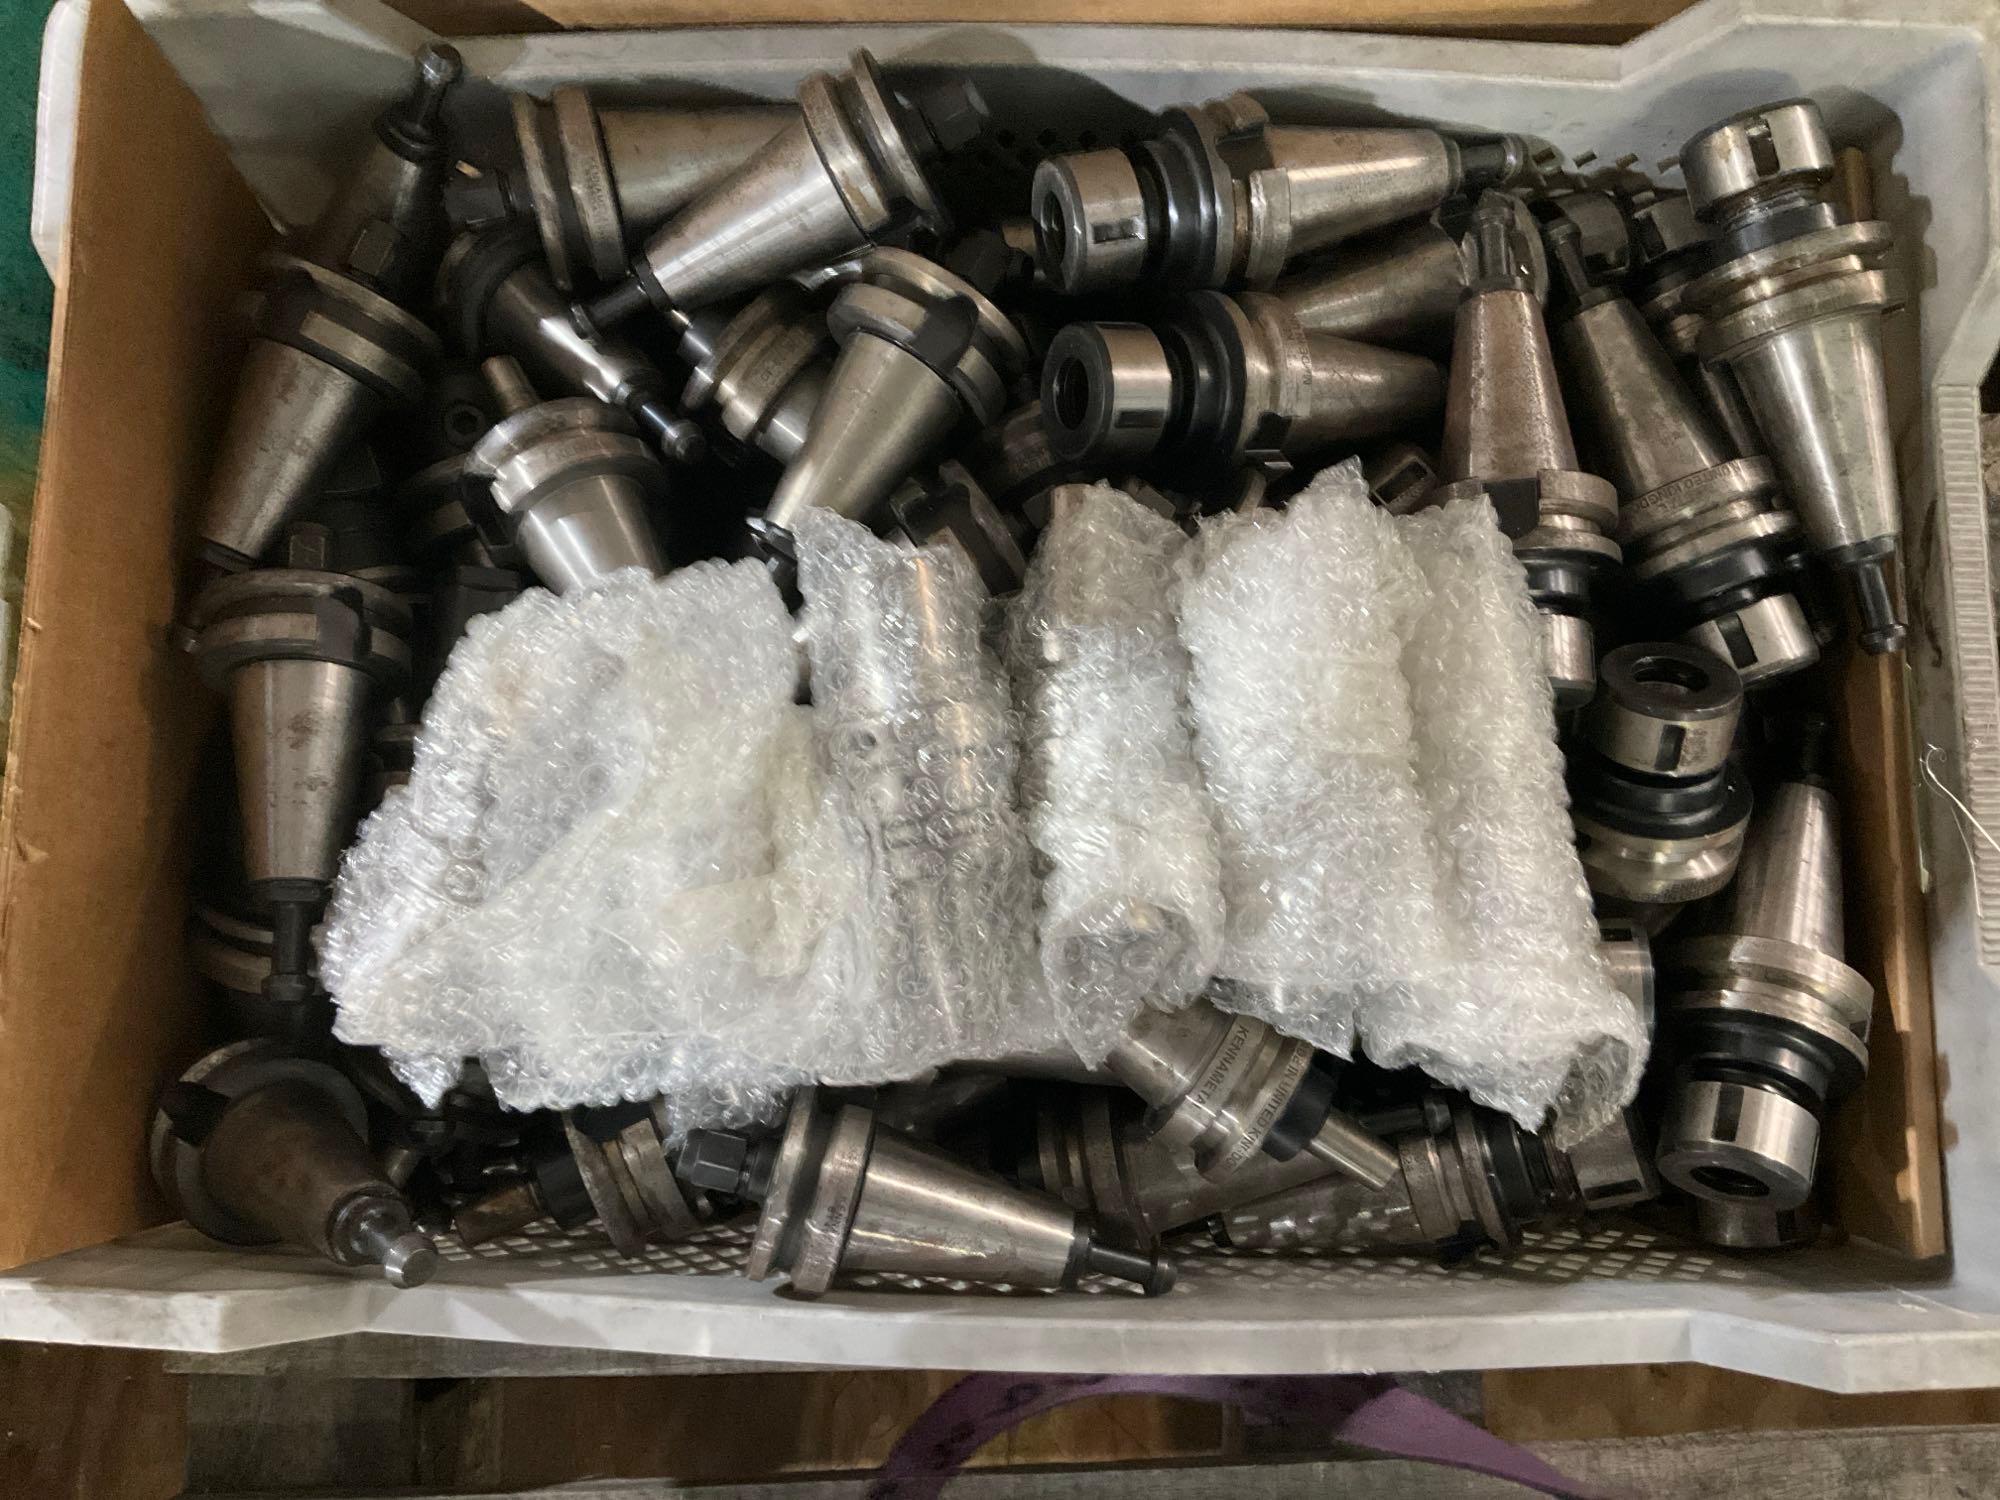 OVER 200 PARLEC, KENNAMETAL, BIG DAISHOWA...COLLET CHUCK; VARIOUS MAKES, MODELS, AND SIZES